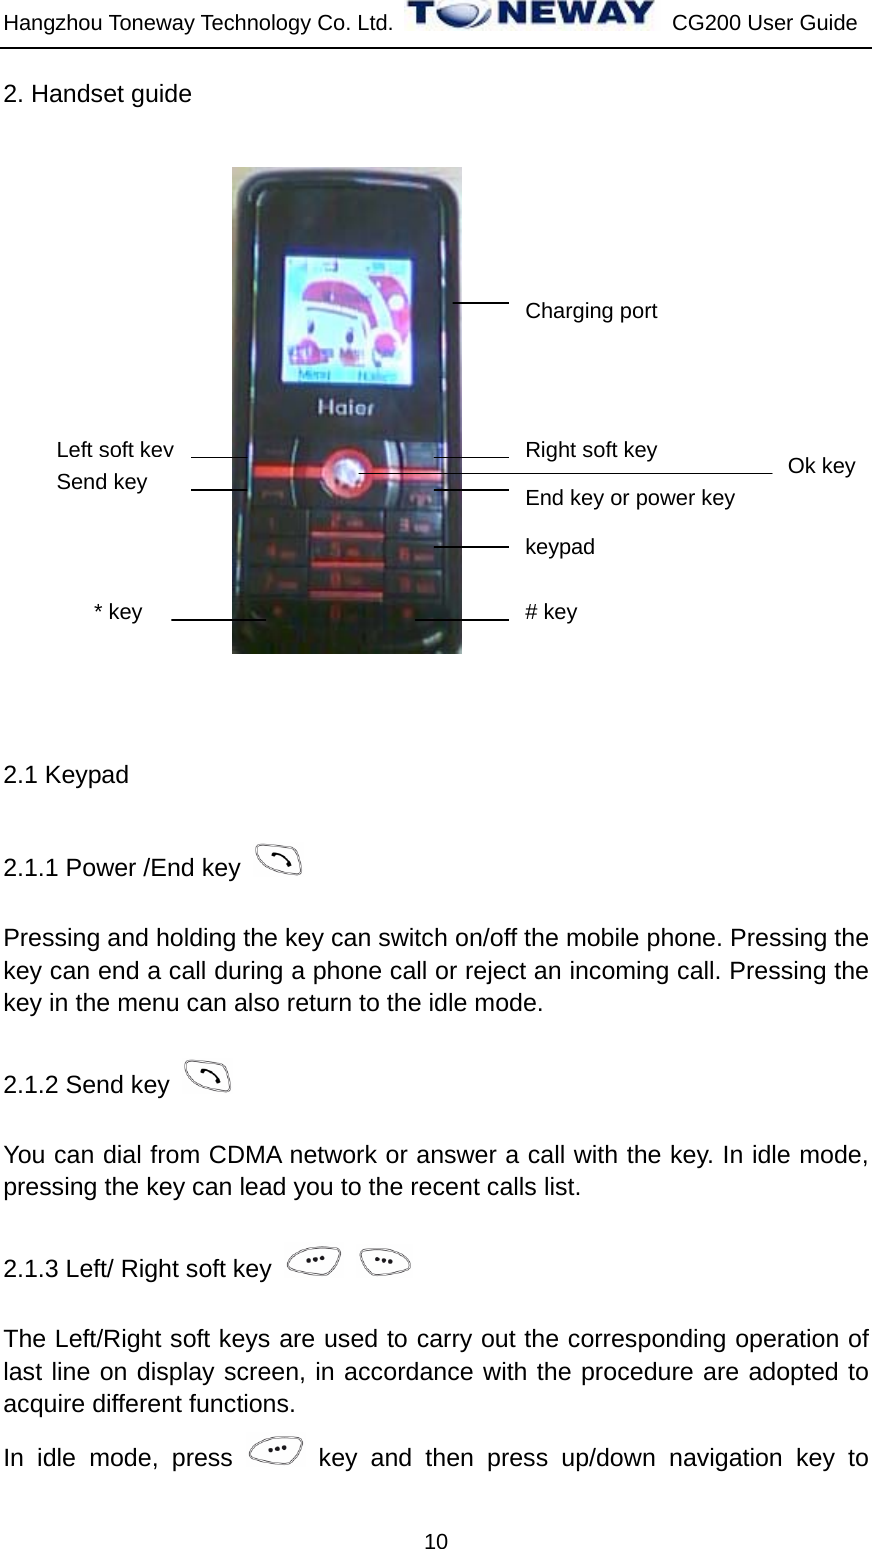 Hangzhou Toneway Technology Co. Ltd.    CG200 User Guide 10 2. Handset guide    2.1 Keypad 2.1.1 Power /End key   Pressing and holding the key can switch on/off the mobile phone. Pressing the key can end a call during a phone call or reject an incoming call. Pressing the key in the menu can also return to the idle mode. 2.1.2 Send key   You can dial from CDMA network or answer a call with the key. In idle mode, pressing the key can lead you to the recent calls list. 2.1.3 Left/ Right soft key     The Left/Right soft keys are used to carry out the corresponding operation of last line on display screen, in accordance with the procedure are adopted to acquire different functions.   In idle mode, press   key and then press up/down navigation key to Left soft key Send key * key Right soft key End key or power key keypad # key Ok key Charging port 